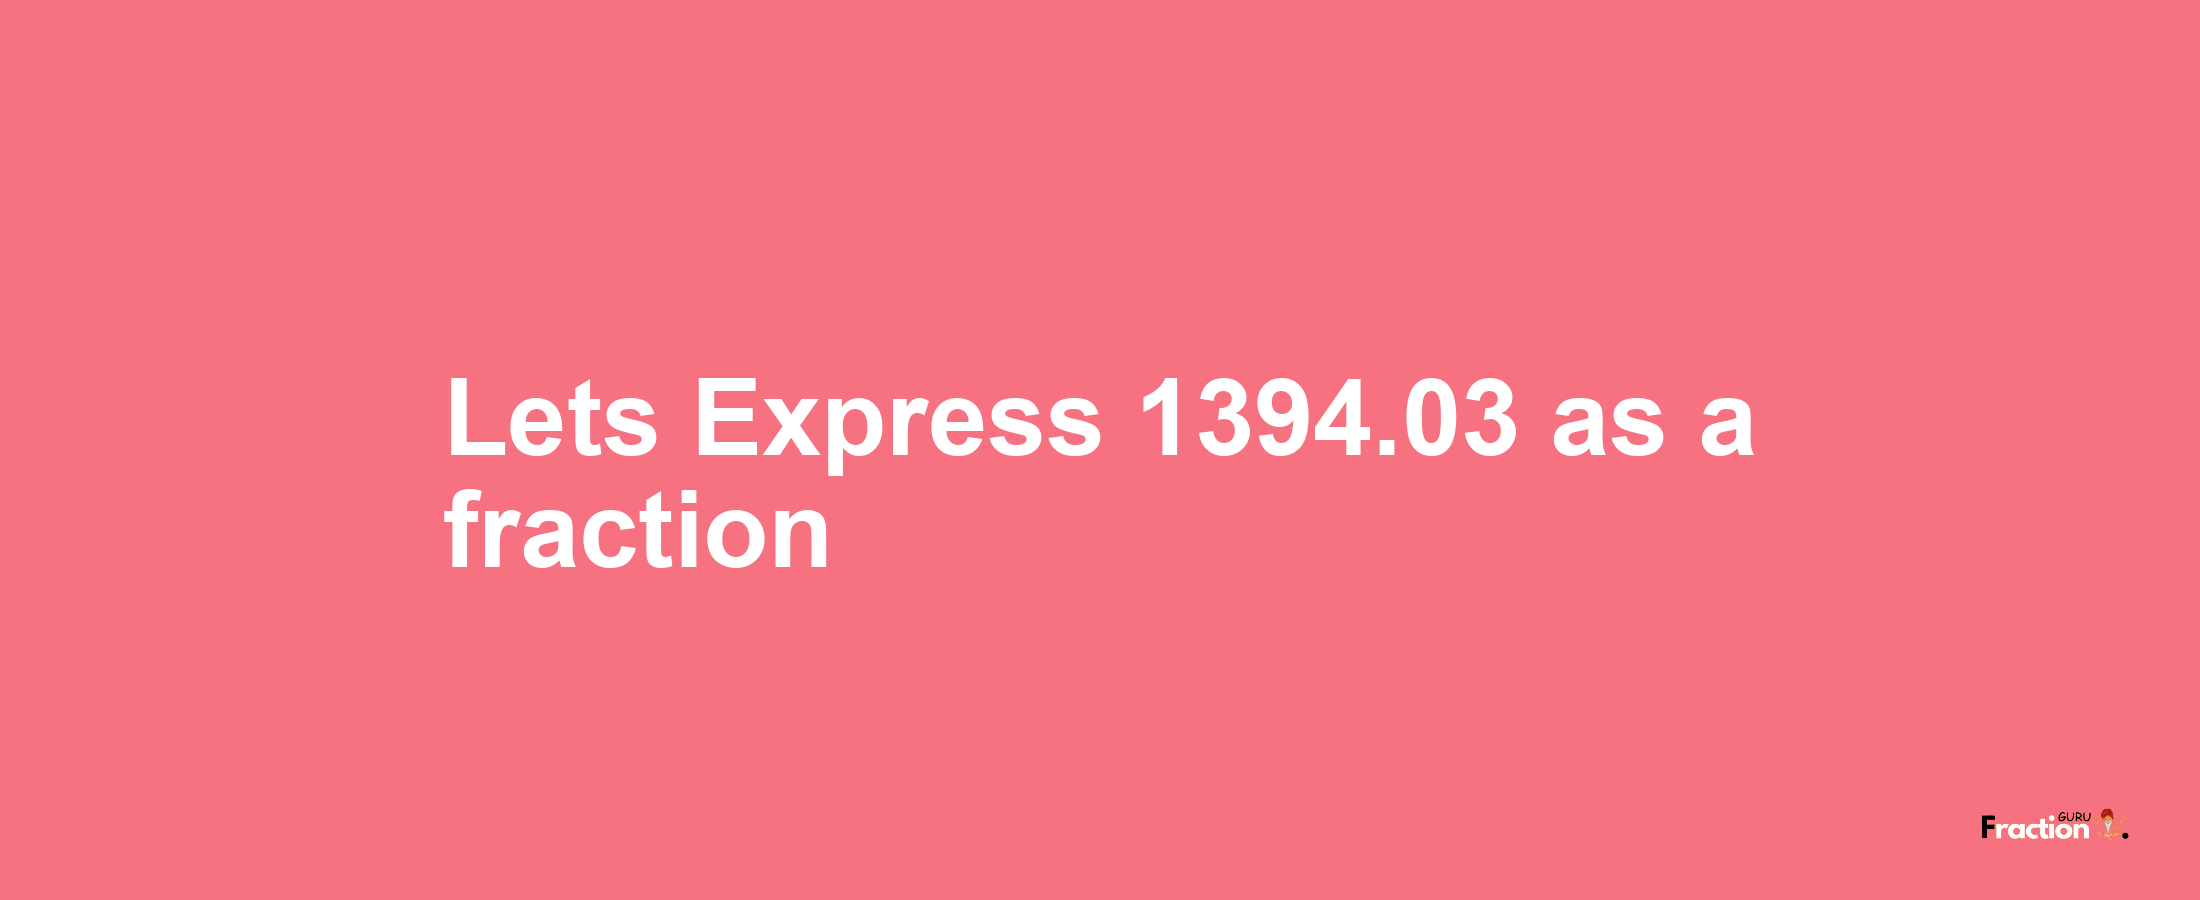 Lets Express 1394.03 as afraction